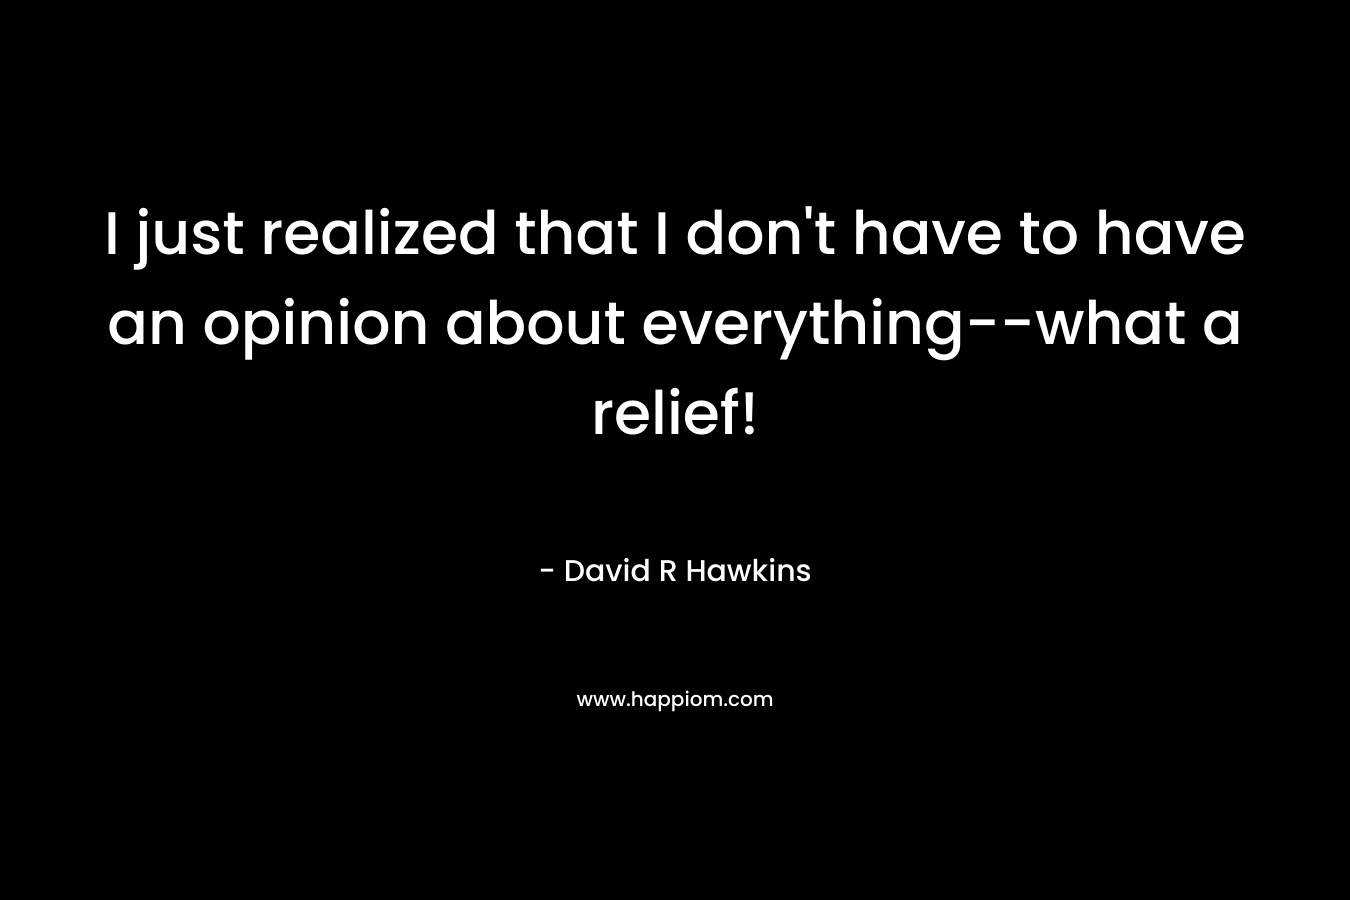 I just realized that I don't have to have an opinion about everything--what a relief!